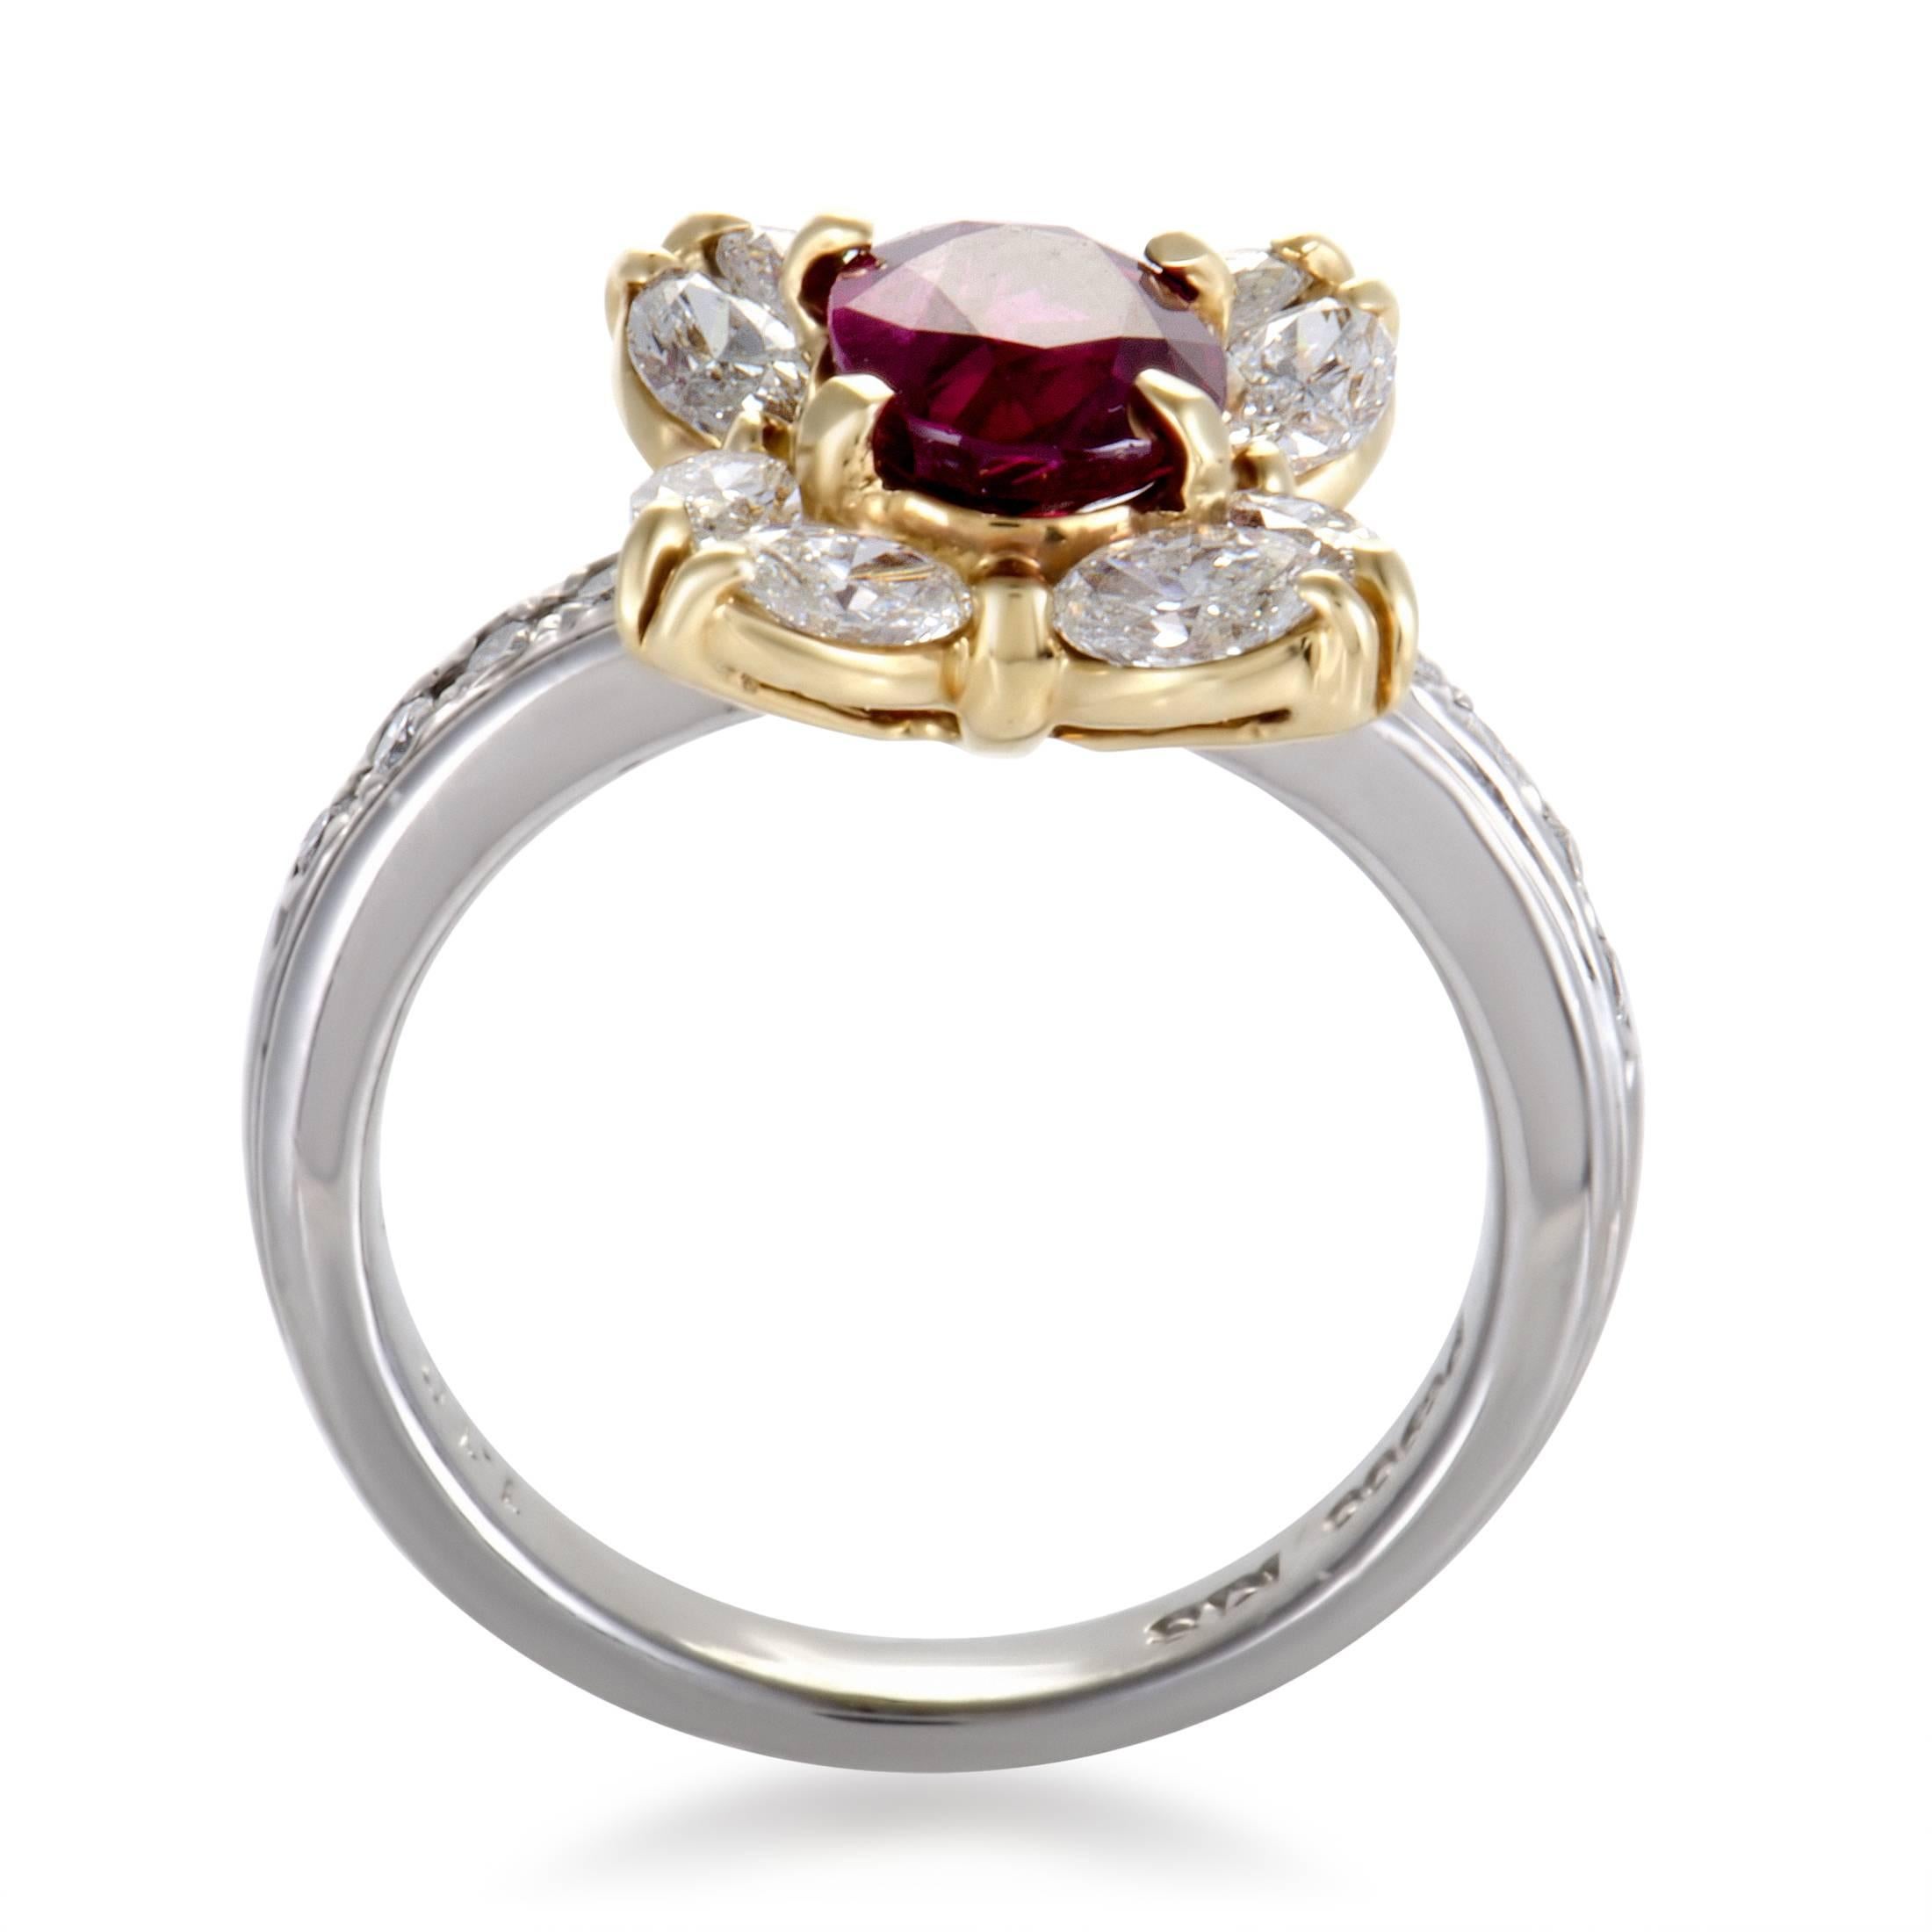 The amazing blend of precious platinum and lustrous diamonds amounting to 0.70ct produces a wonderfully bright and luxurious allure in this stylish ring while radiant 18K yellow gold and a gorgeous ruby weighing 1.10 carats add exciting color to the